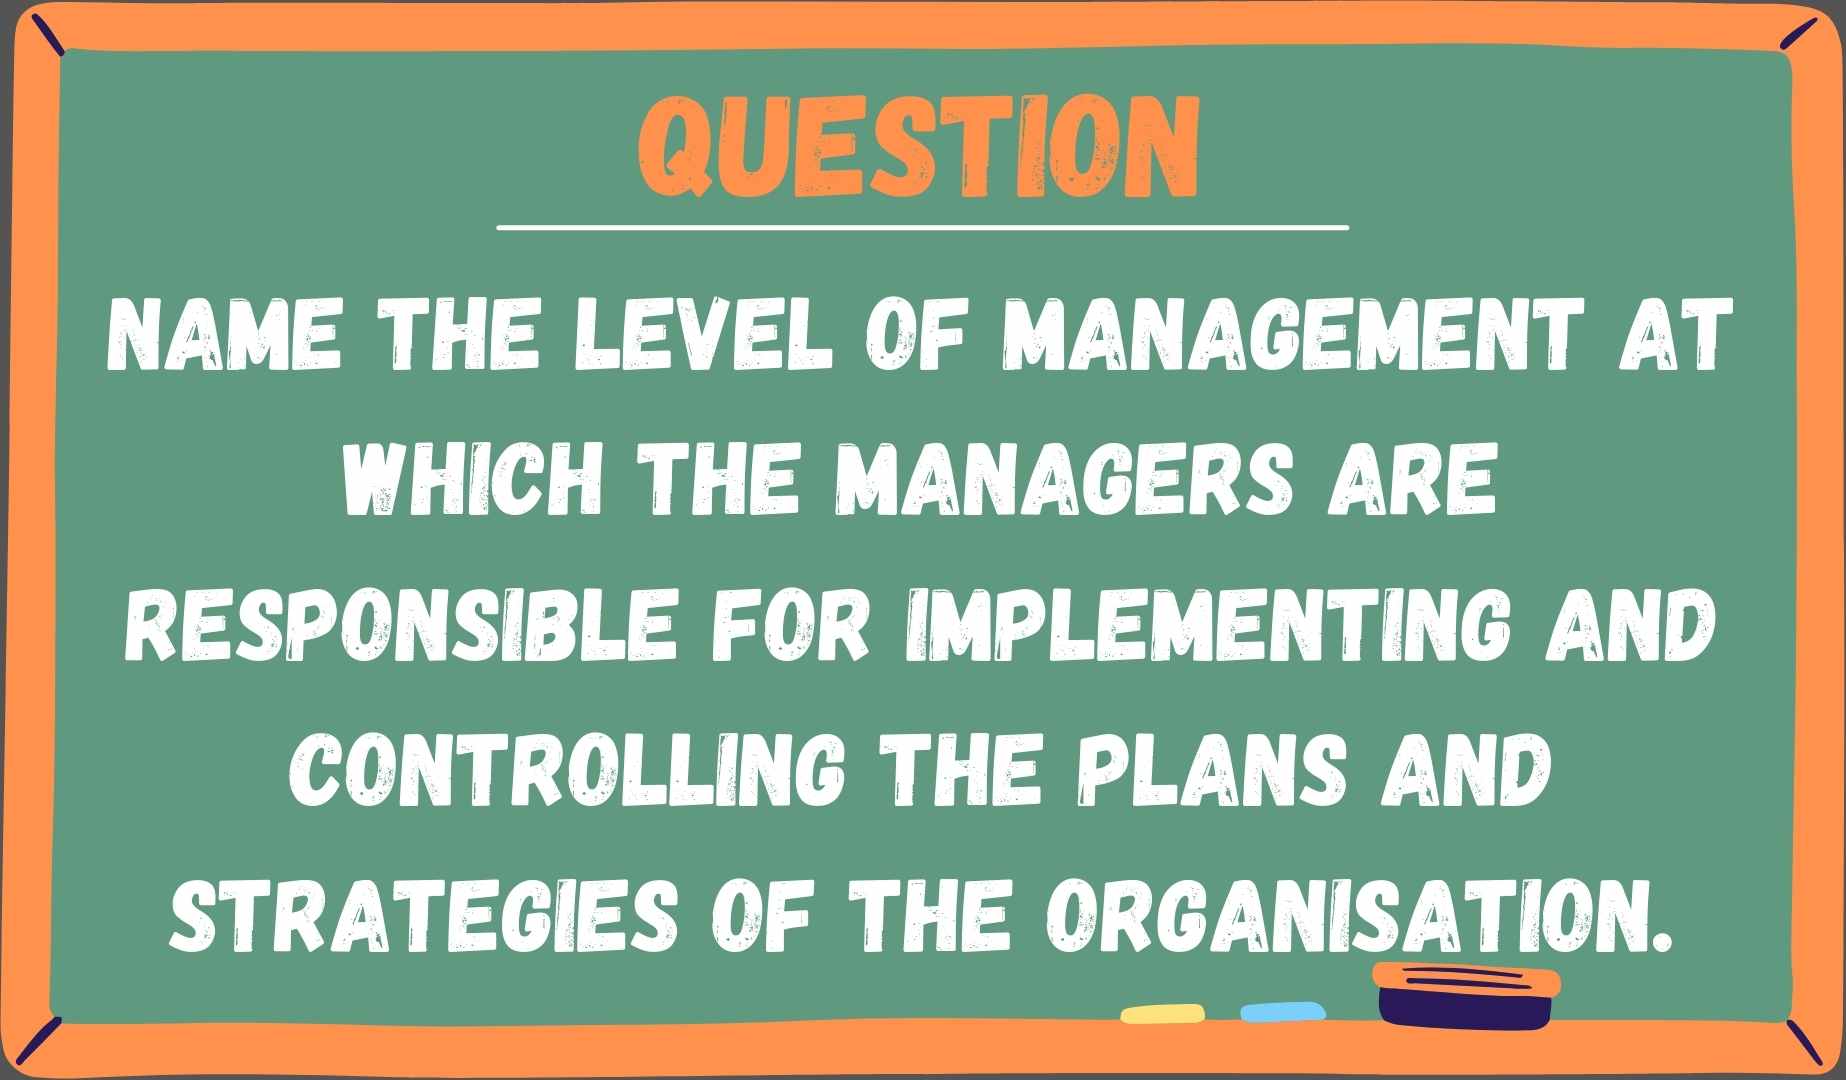 Name the level of management at which the managers are responsible for implementing and controlling the plans and strategies of the organisation